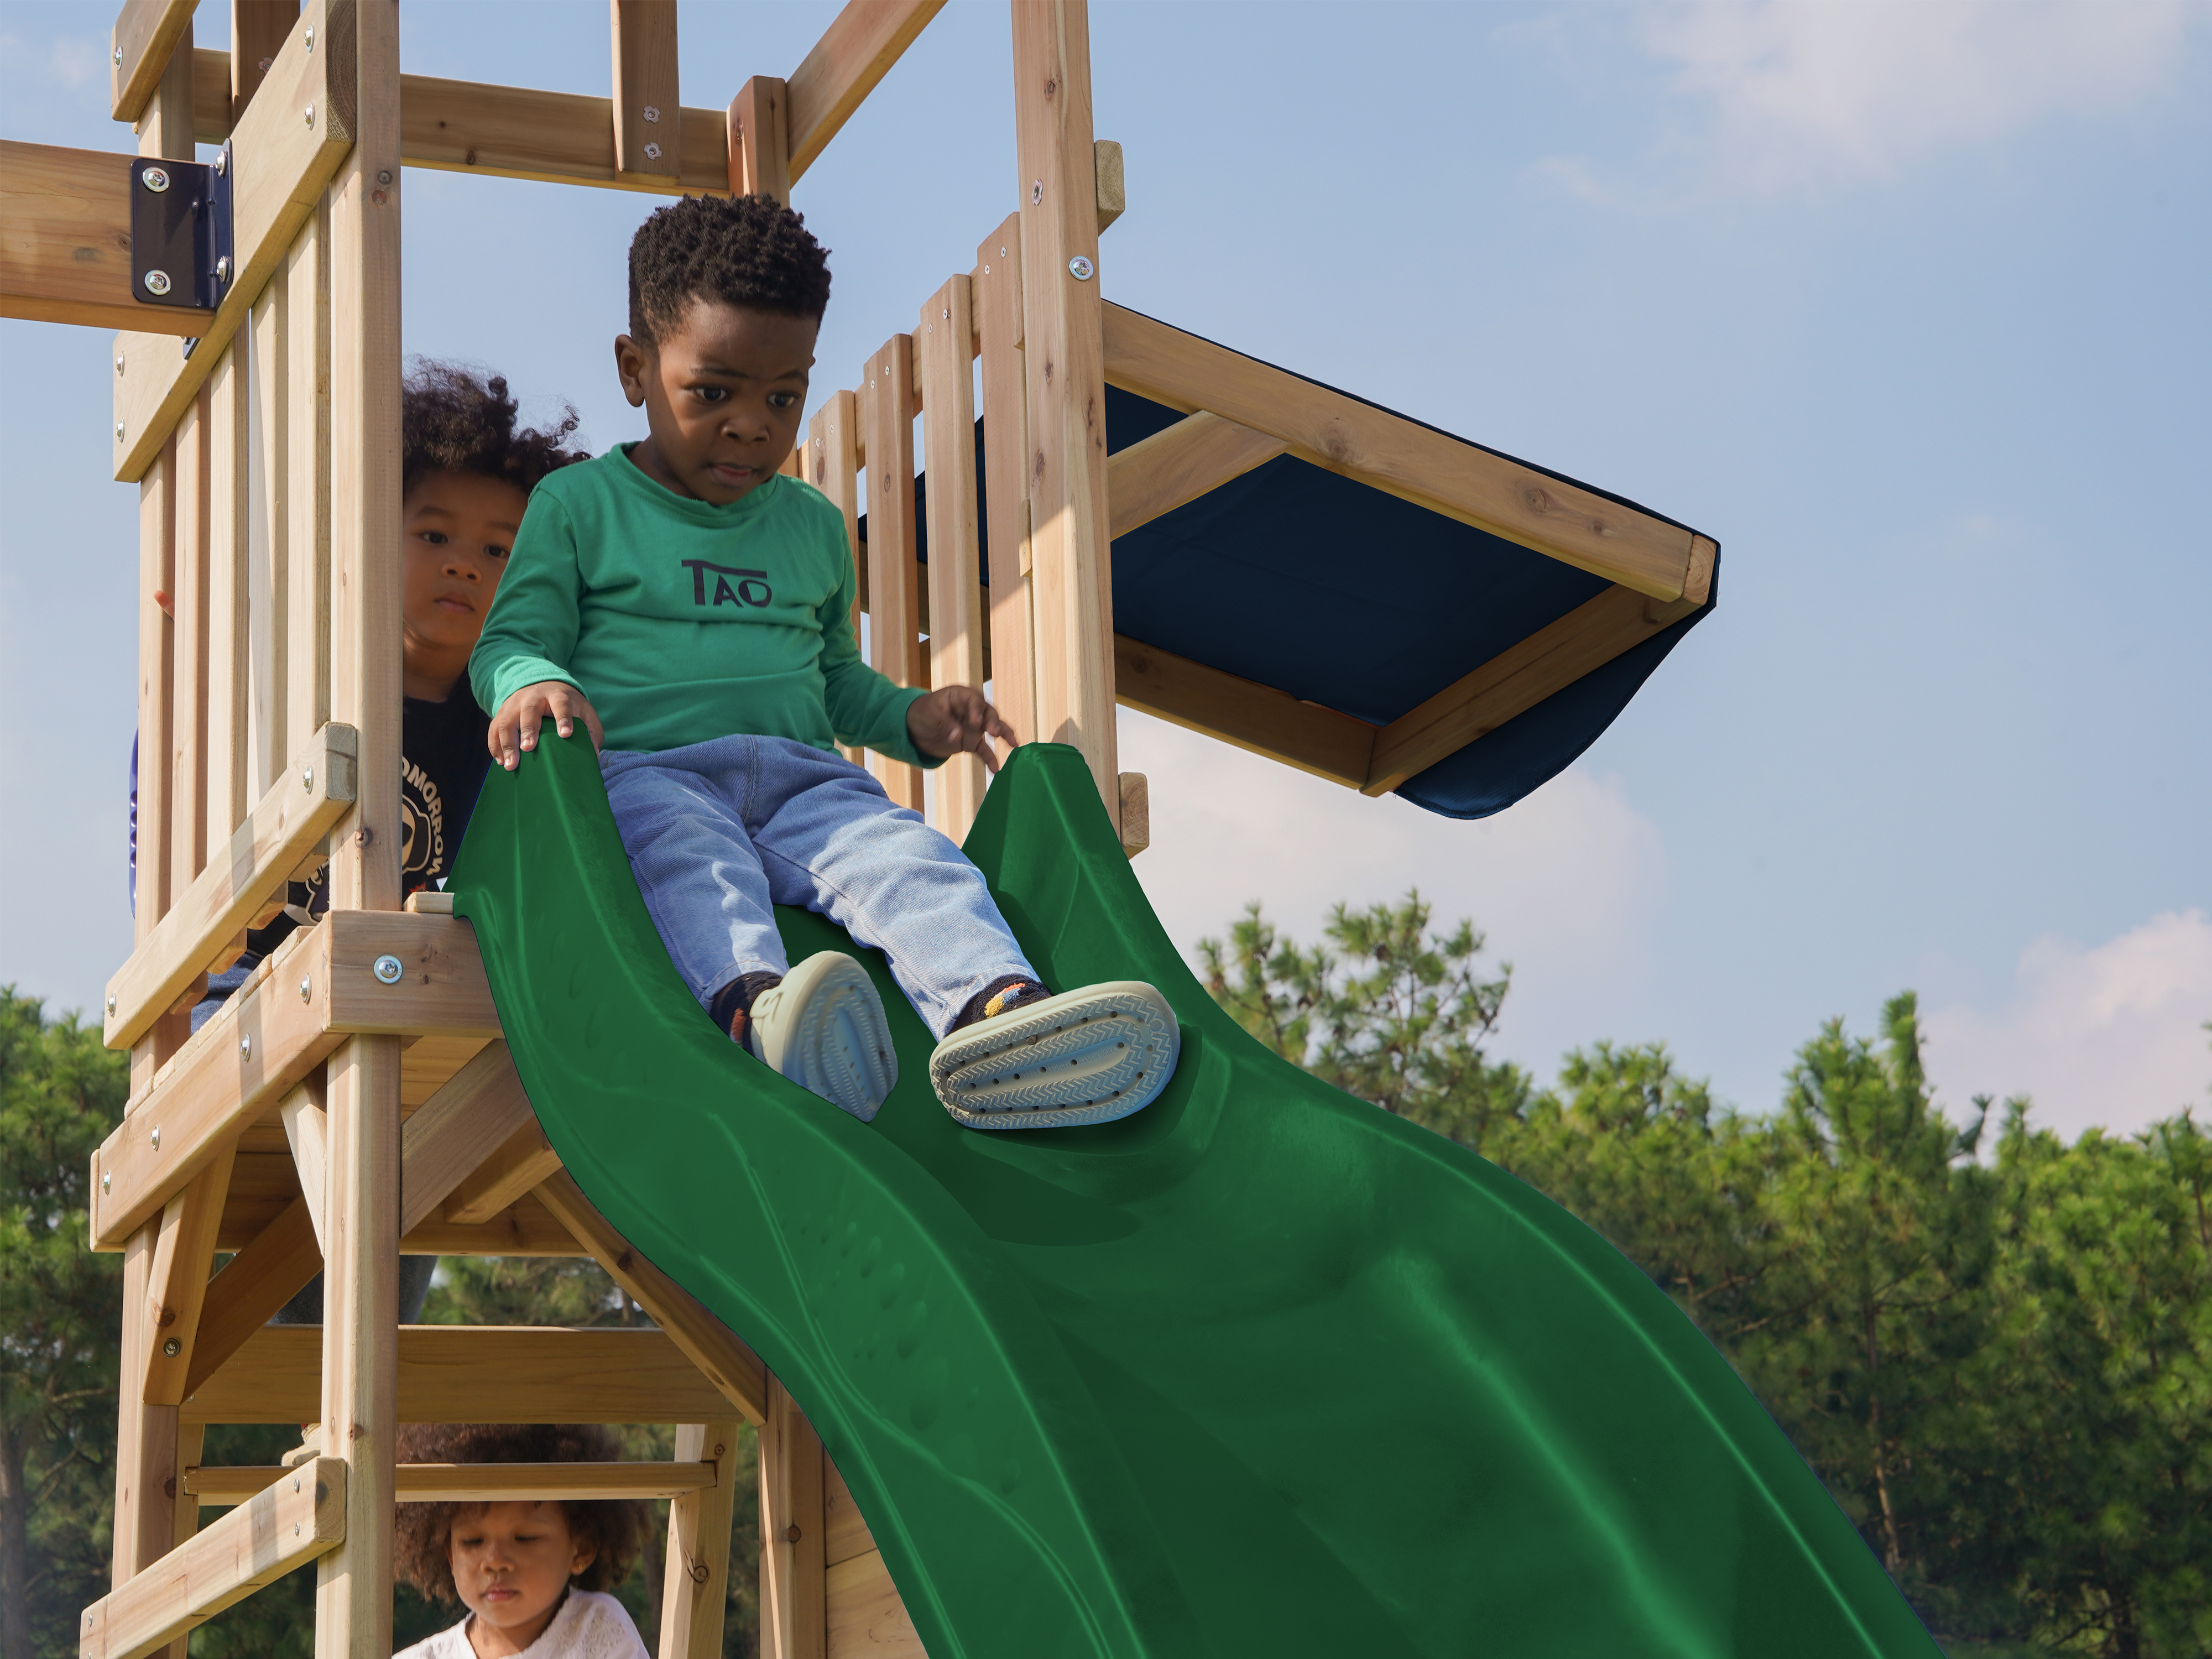 Malik play tower with double swing and play wall - green slide